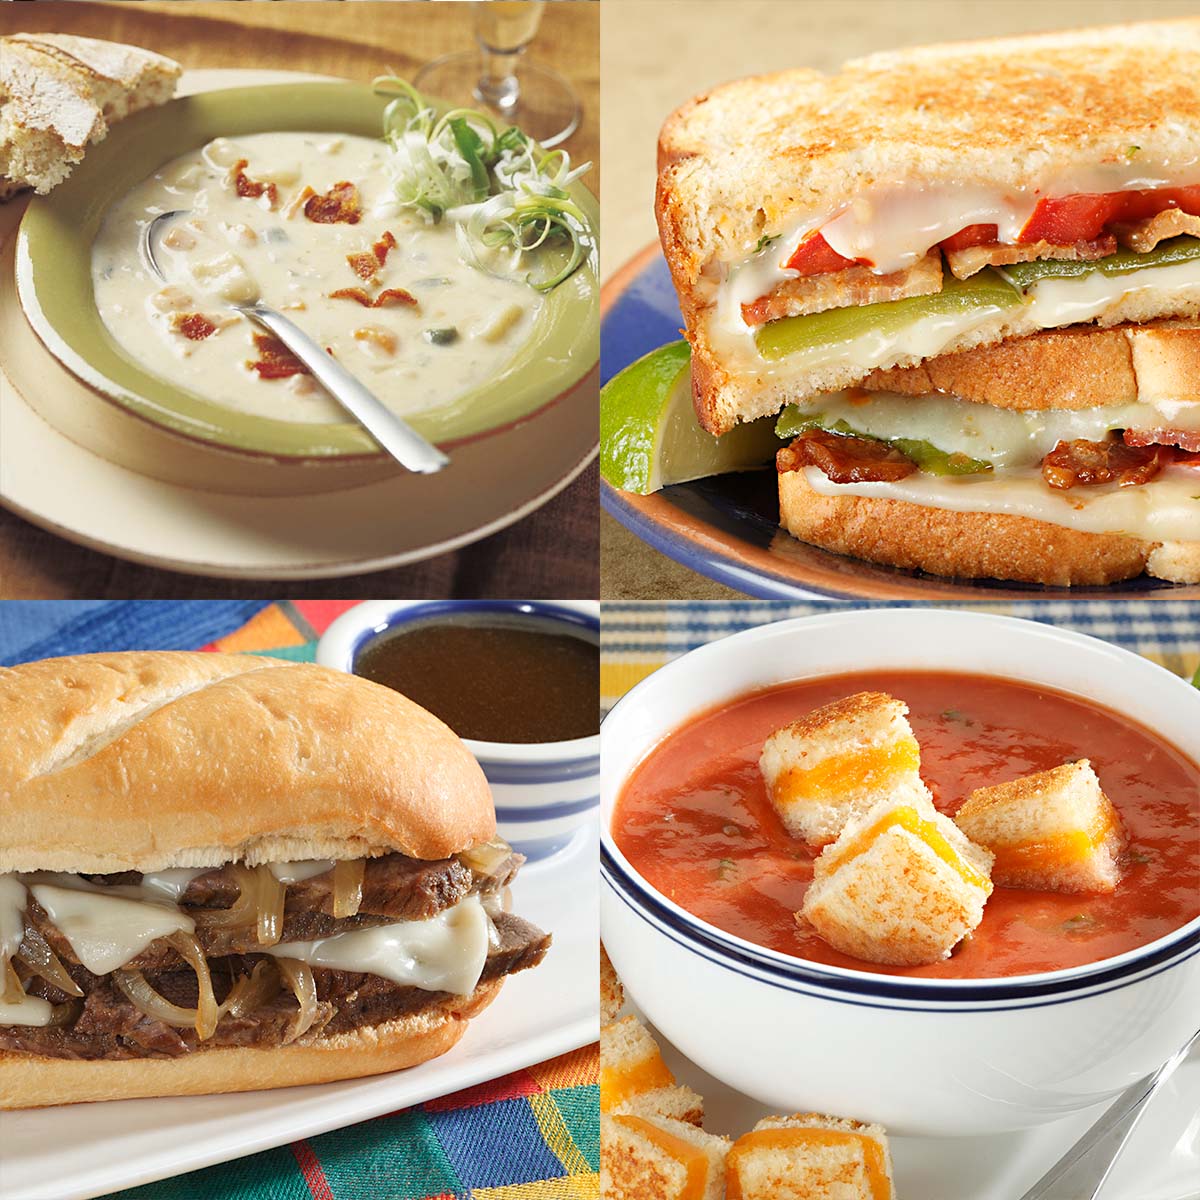 4 Irresistibly Comforting Soup and Sandwich Pairings